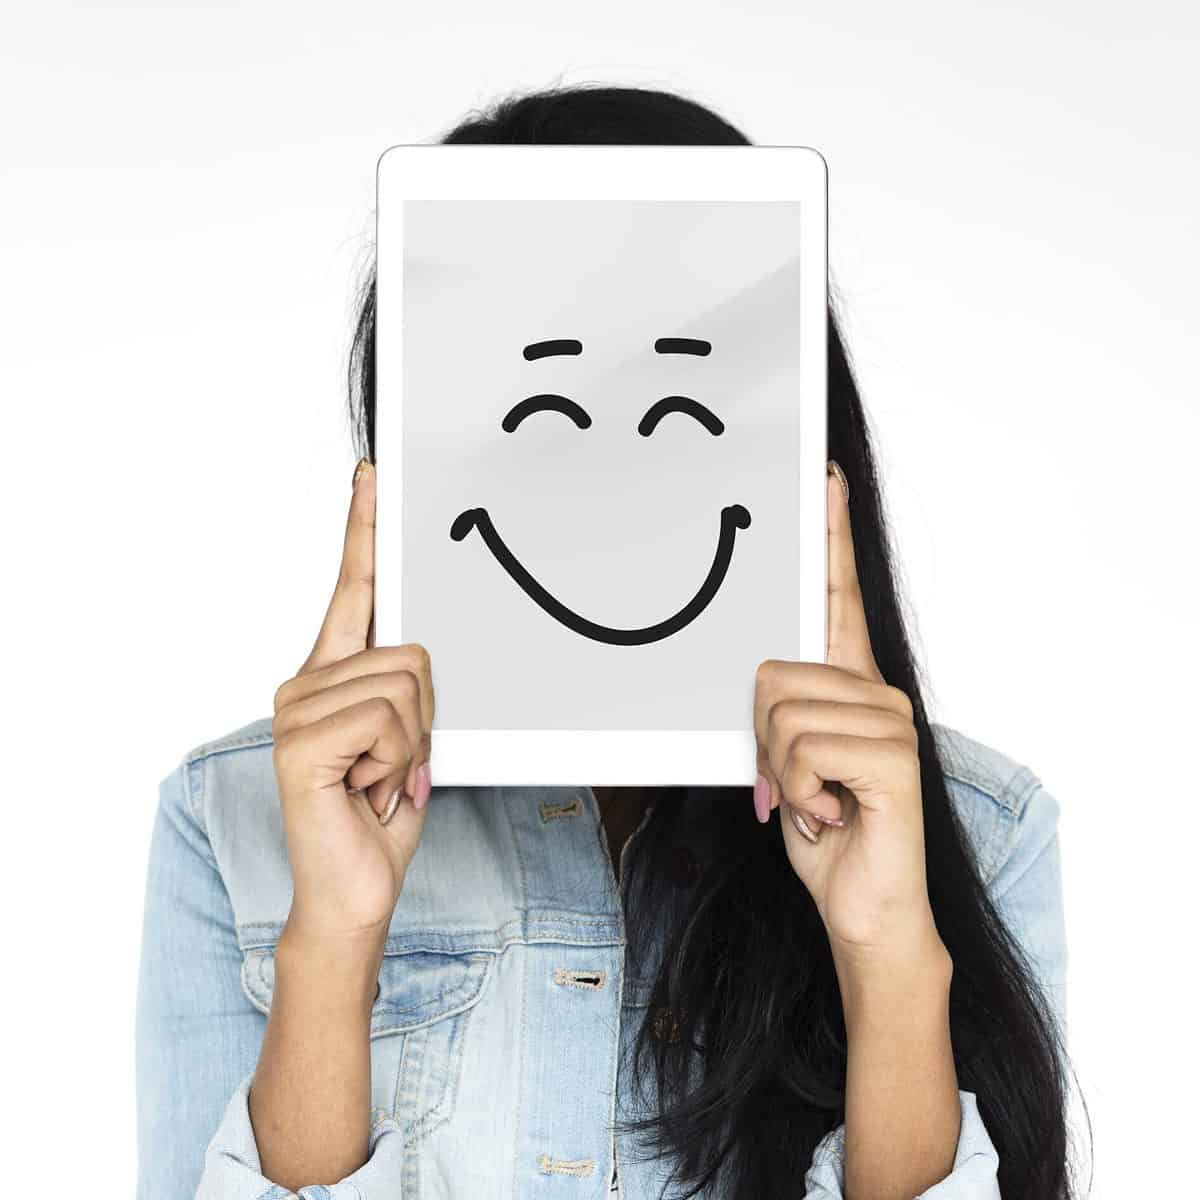 Learned Optimism: Can You Become an Optimistic Person?